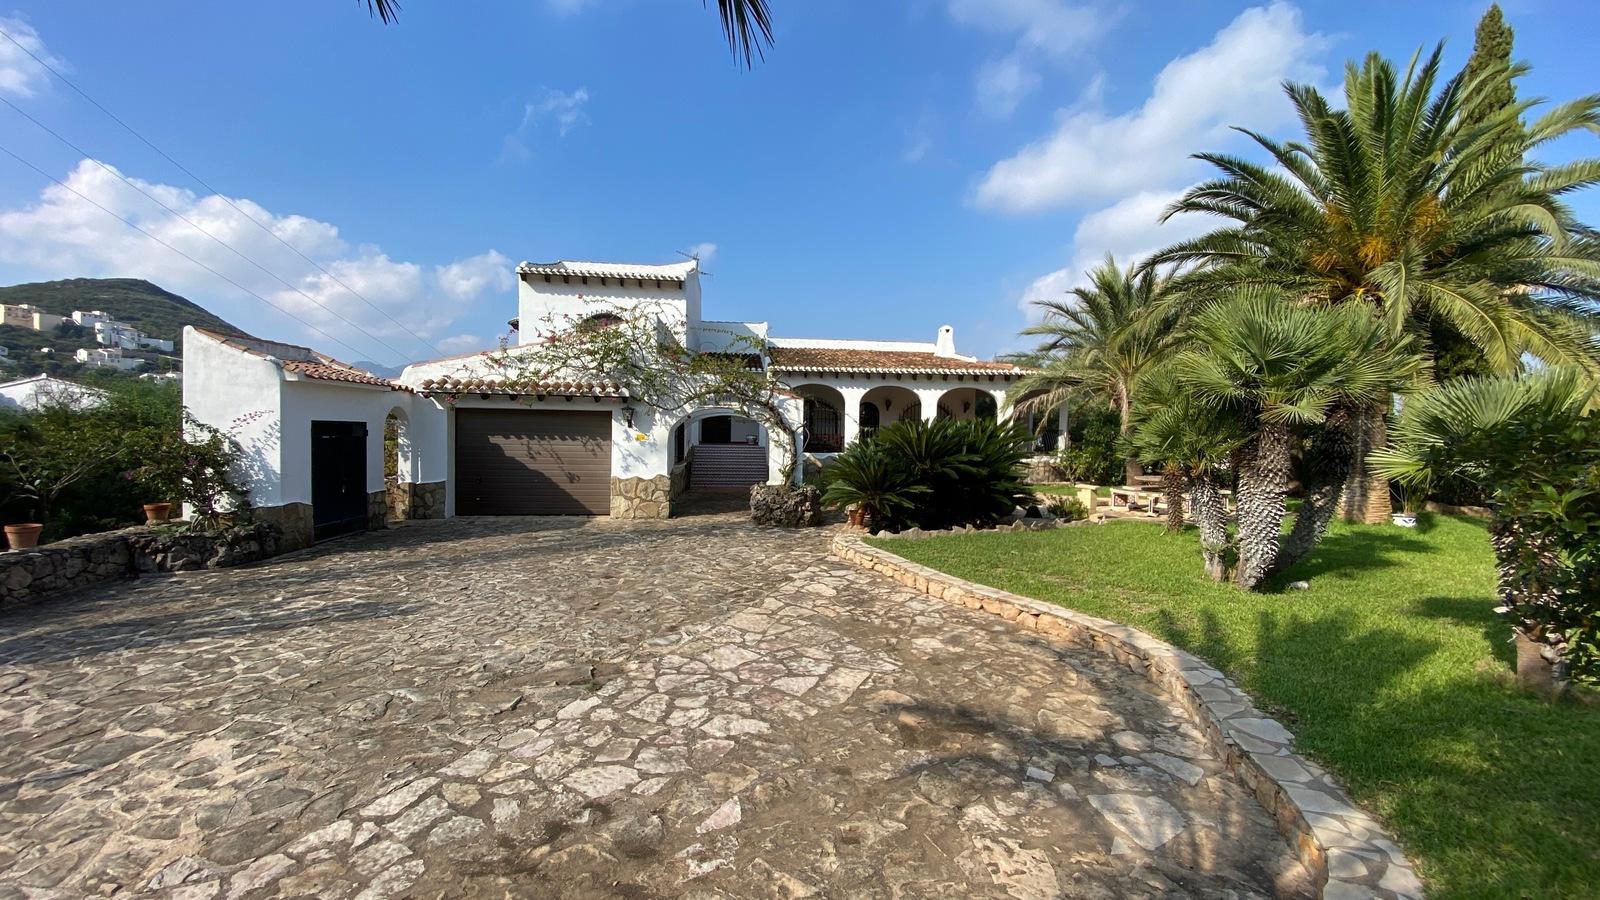 Villa with large plot and level access, magnificent views, large terraces, BBQ, central heating, air conditioning, garage and much more.